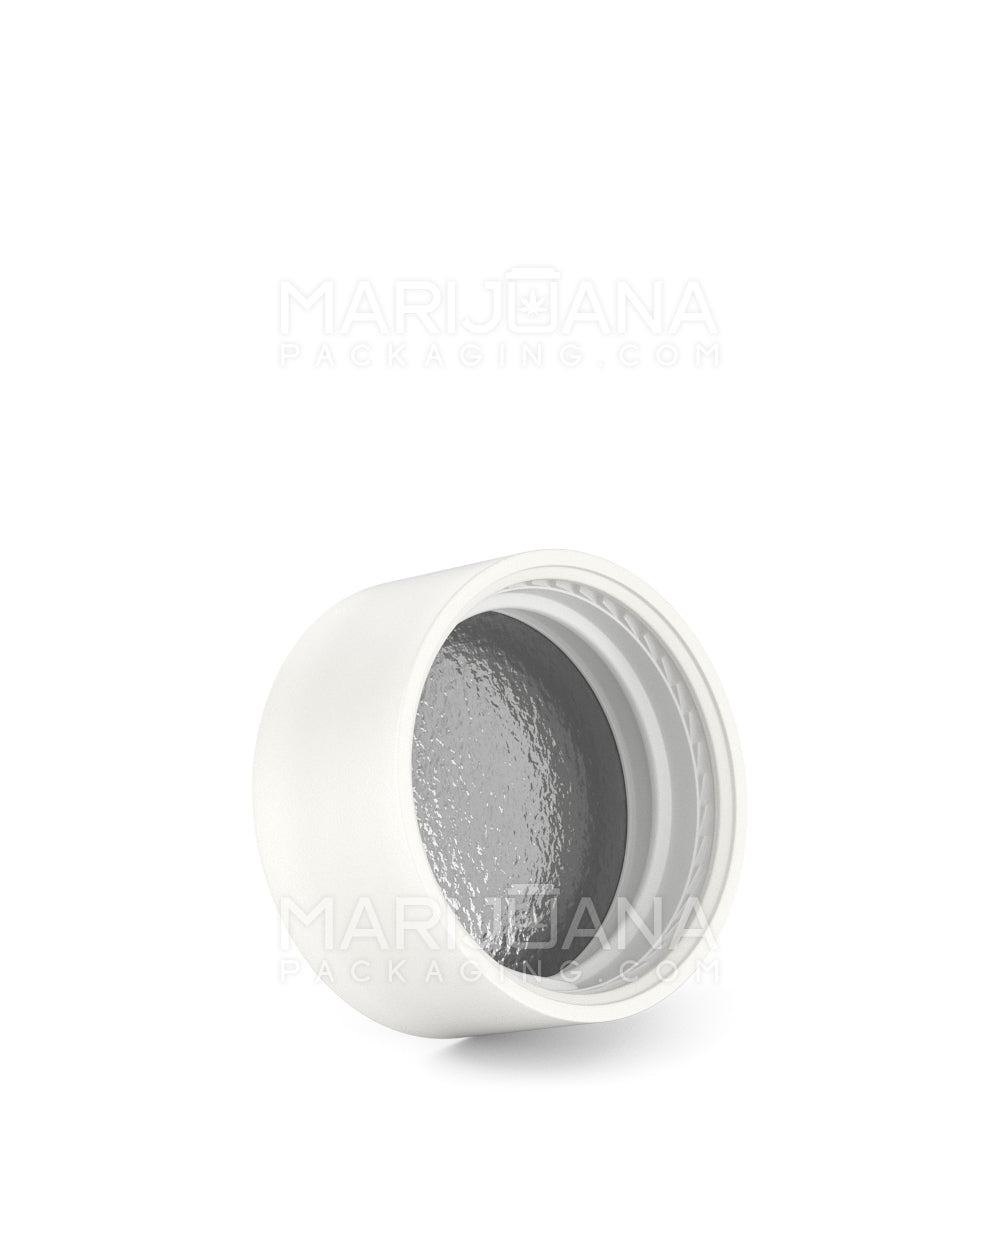 POLLEN GEAR | HiLine Child Resistant Smooth Push Down & Turn Plastic Scooped Caps w/ Foil Liner | 28mm - Matte White - 308 Count - 2